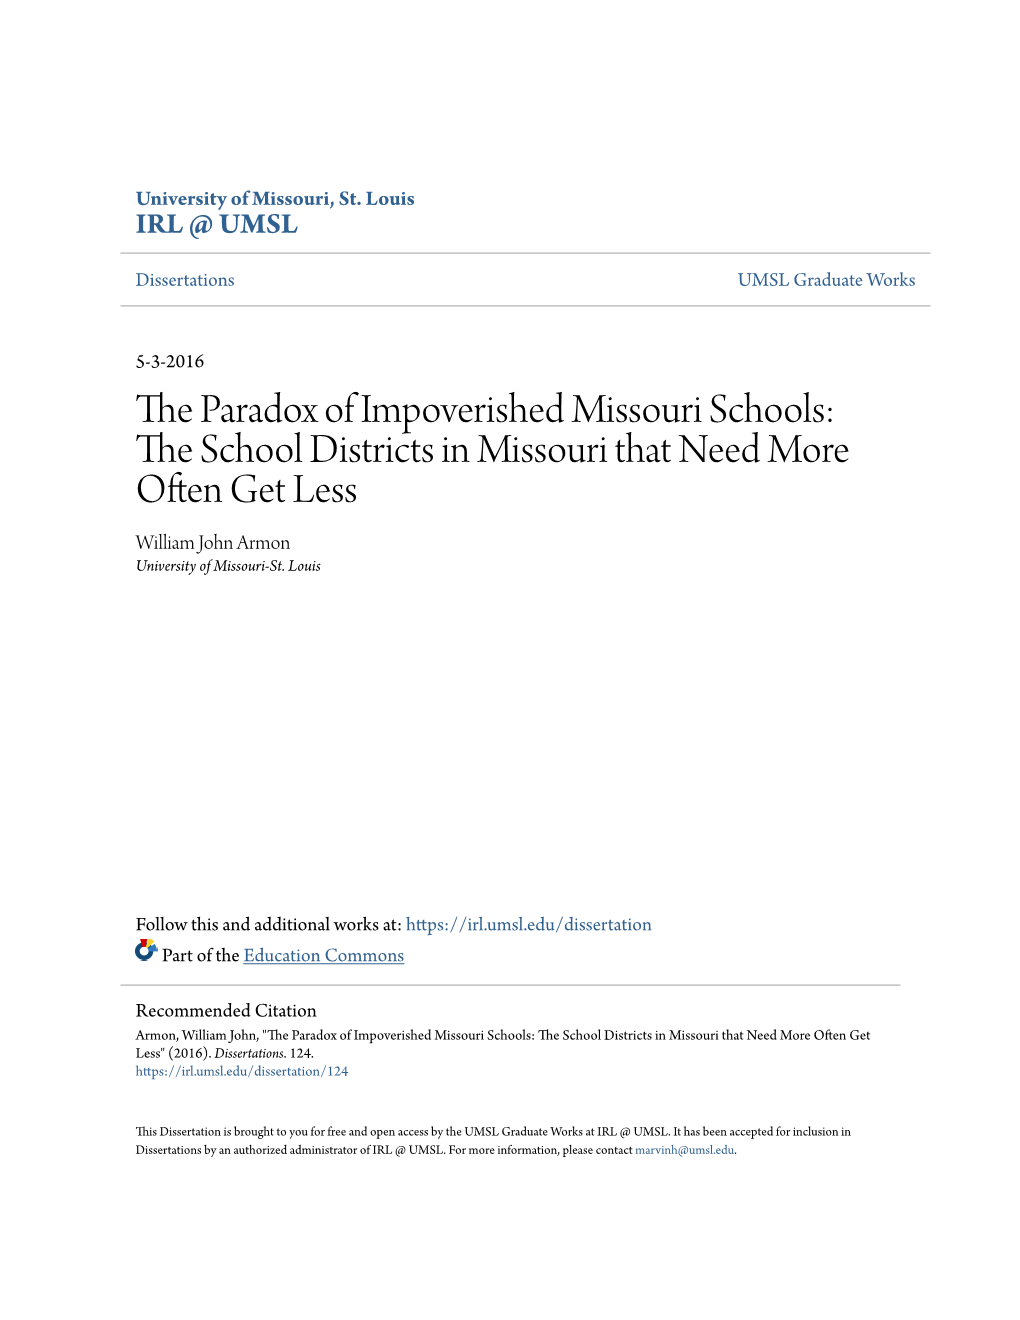 The School Districts in Missouri That Need More Often Get Less